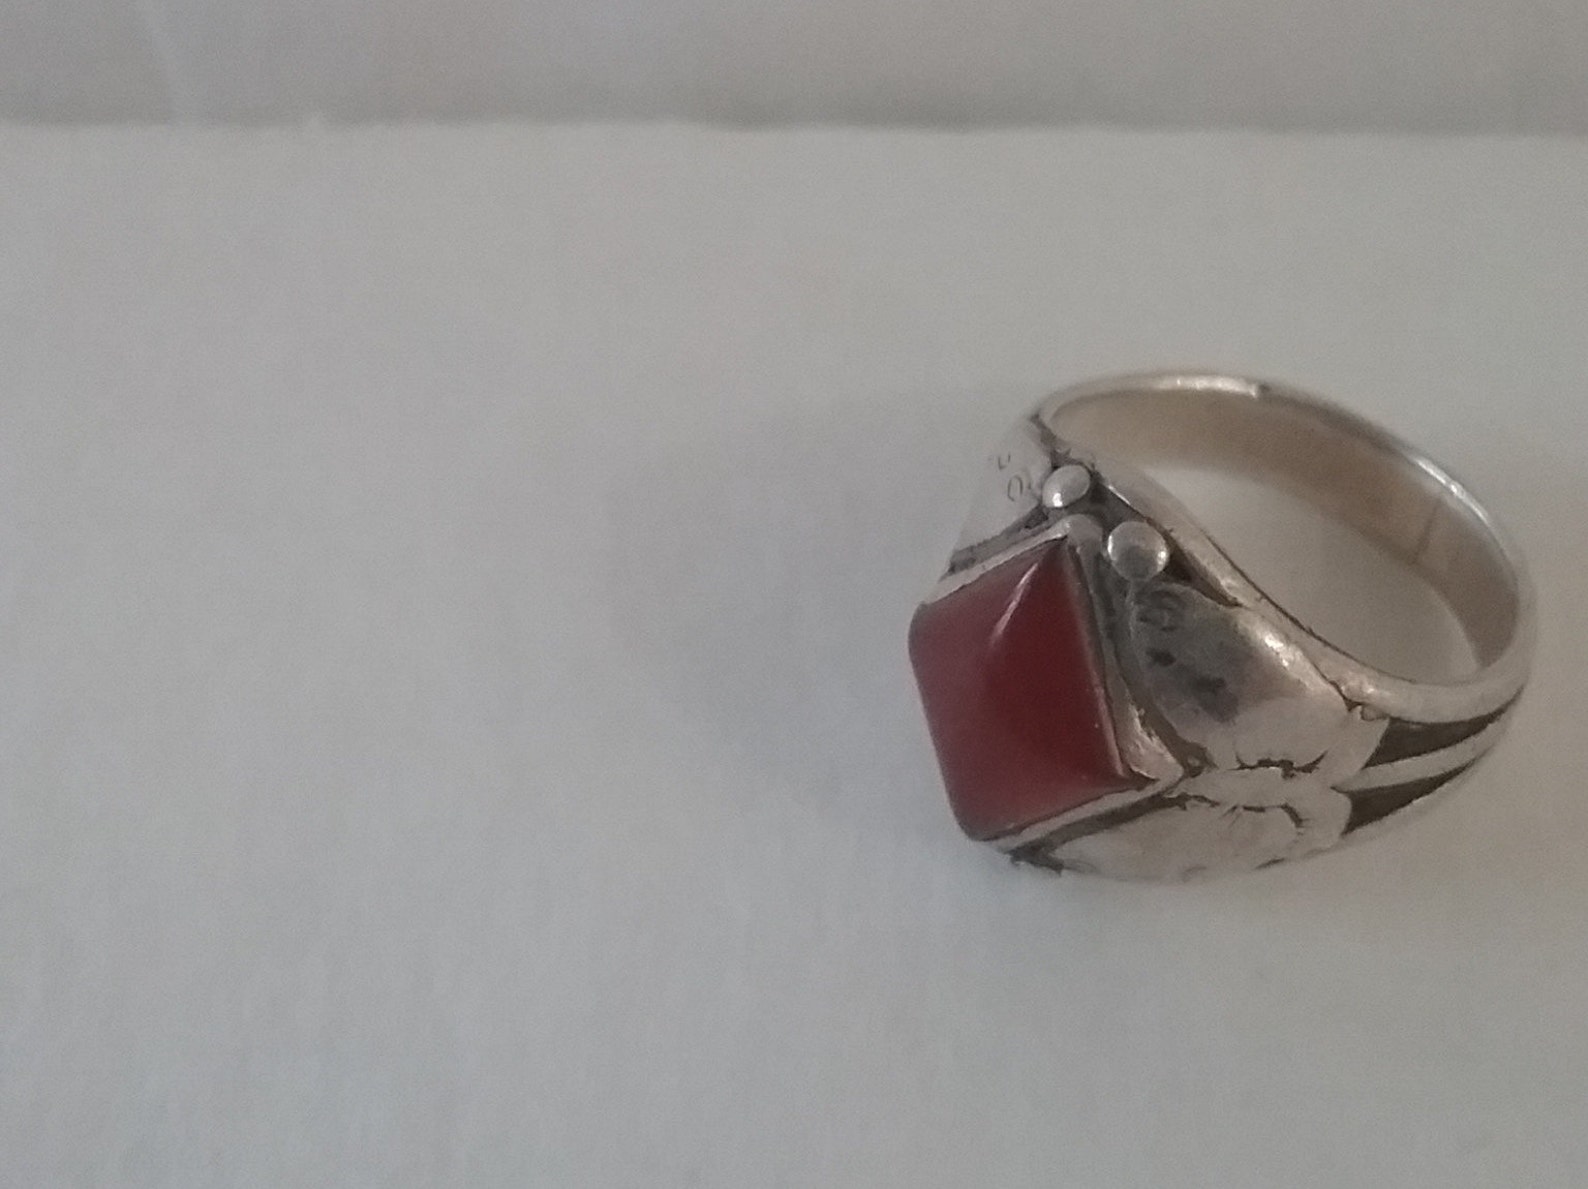 Antique Childs Ring - Etsy